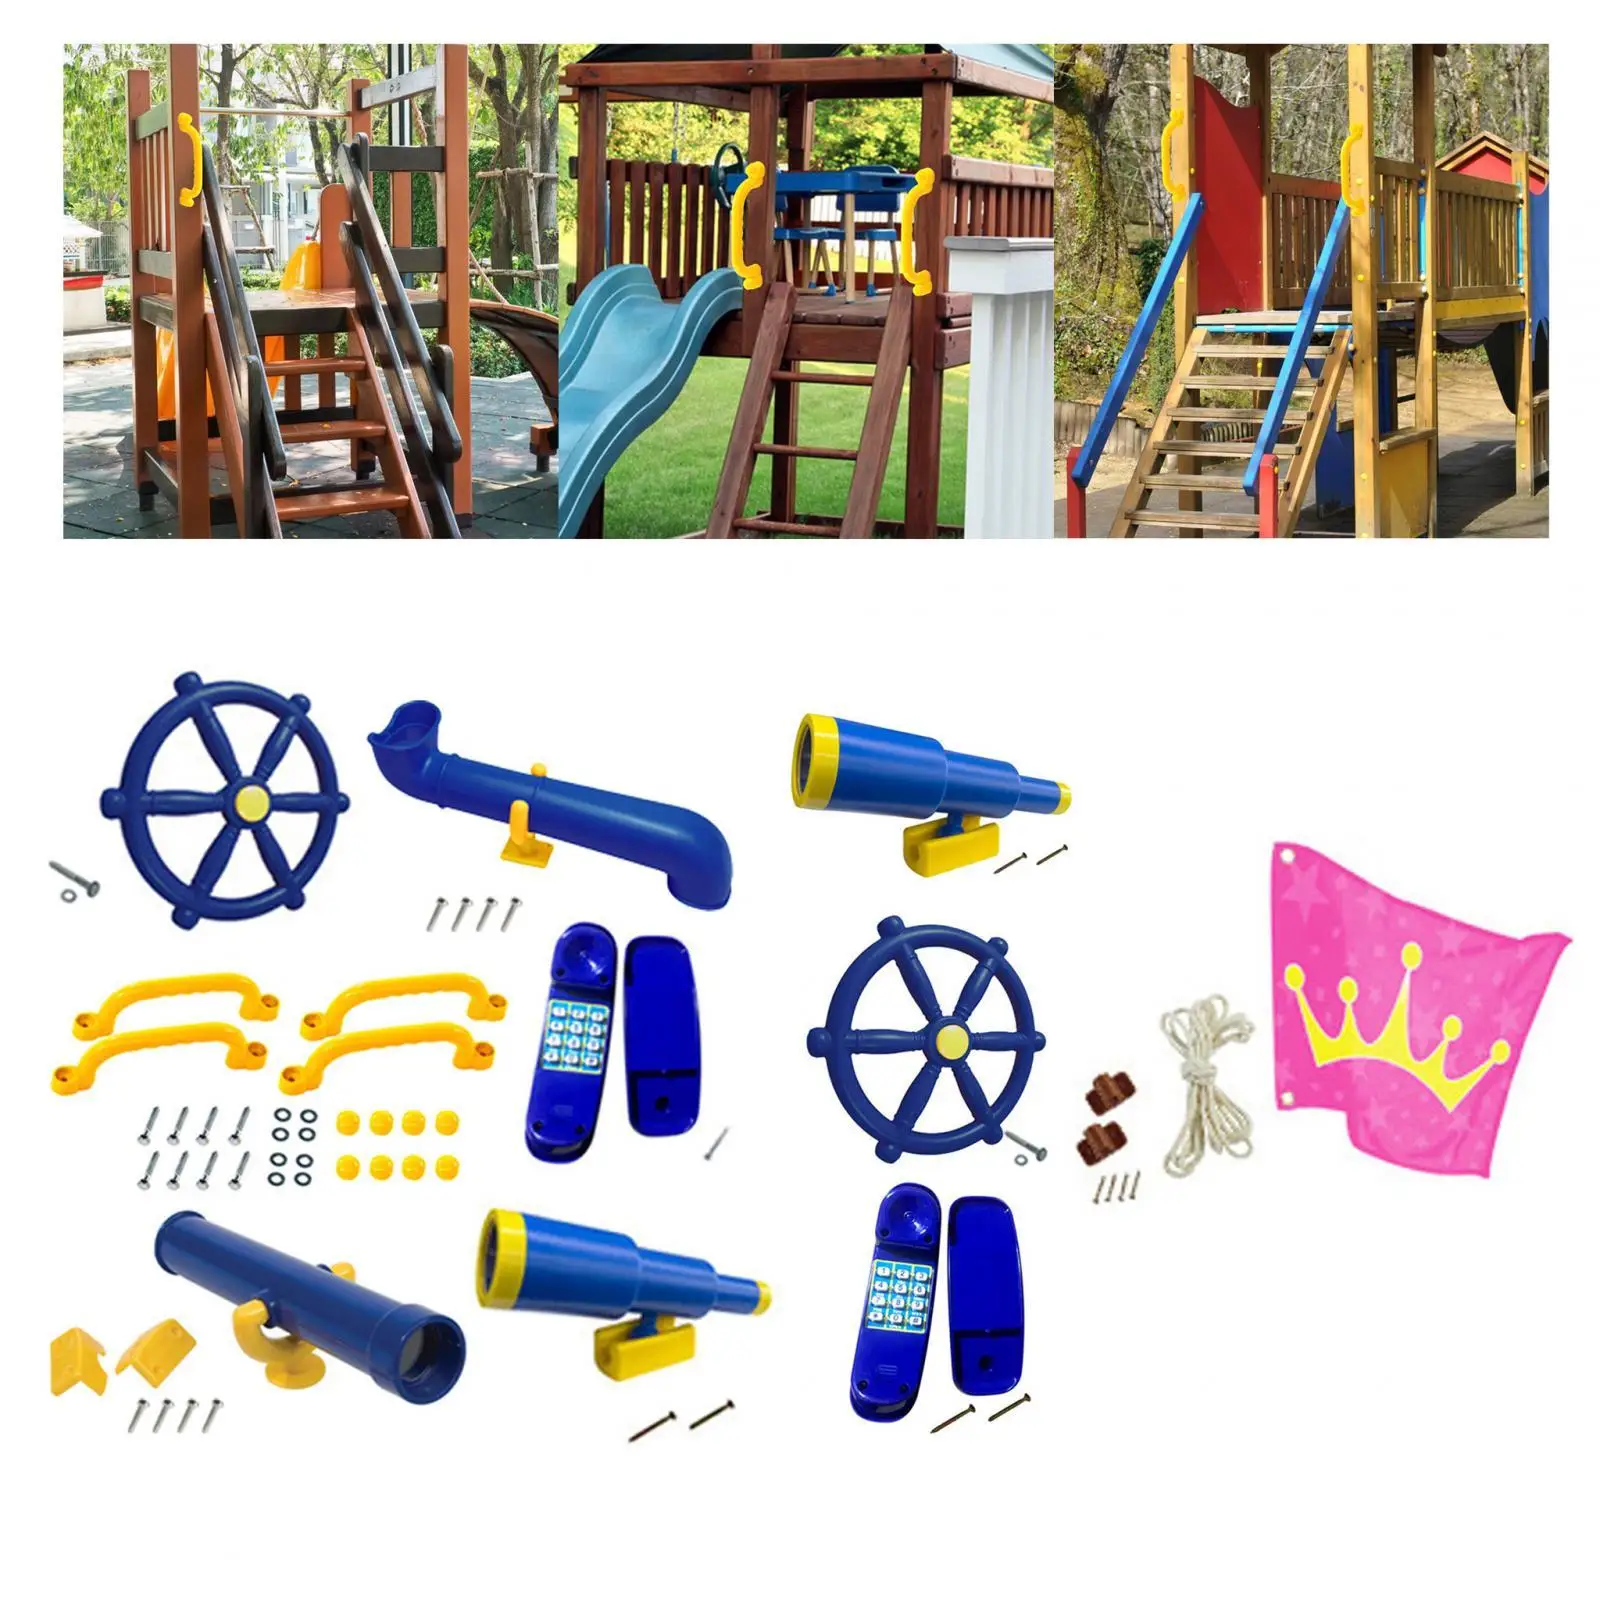 Playground Equipment Outdoor Games Toys Heavy Duty Pirate Ship Parts for Backyard Swingset Tree House Playhouse Holiday Gifts